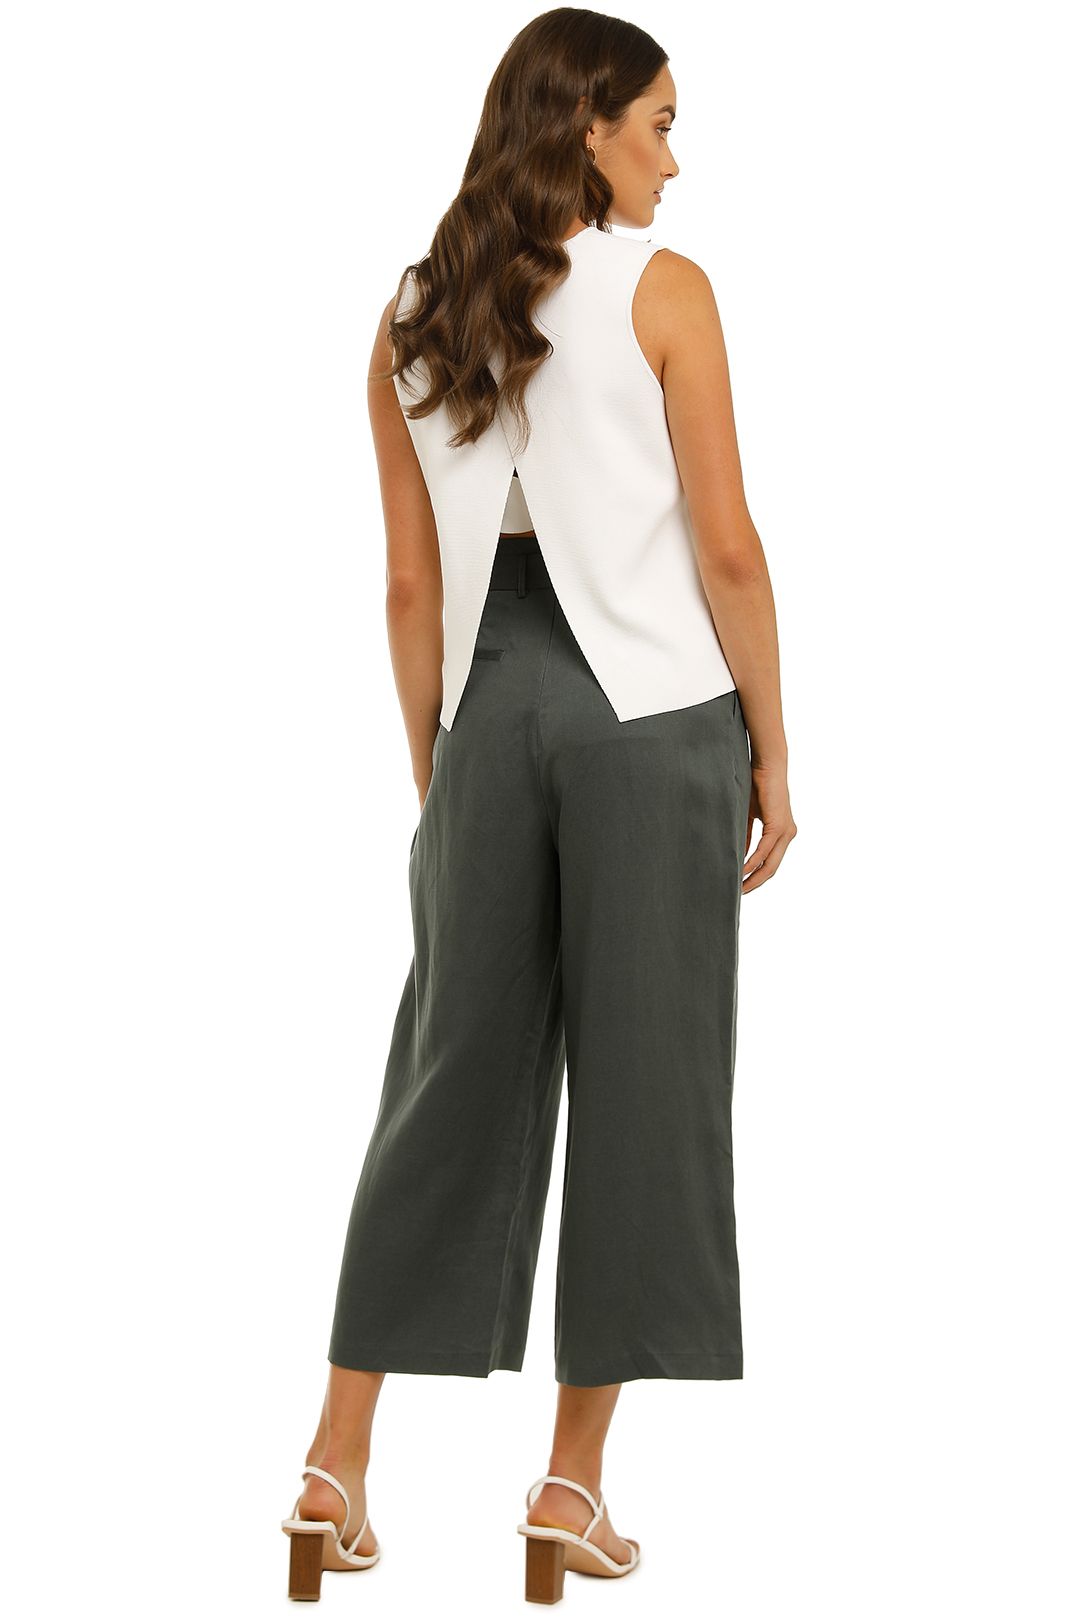 Grace-Willow-Waverley-Pant-Thyme-Back